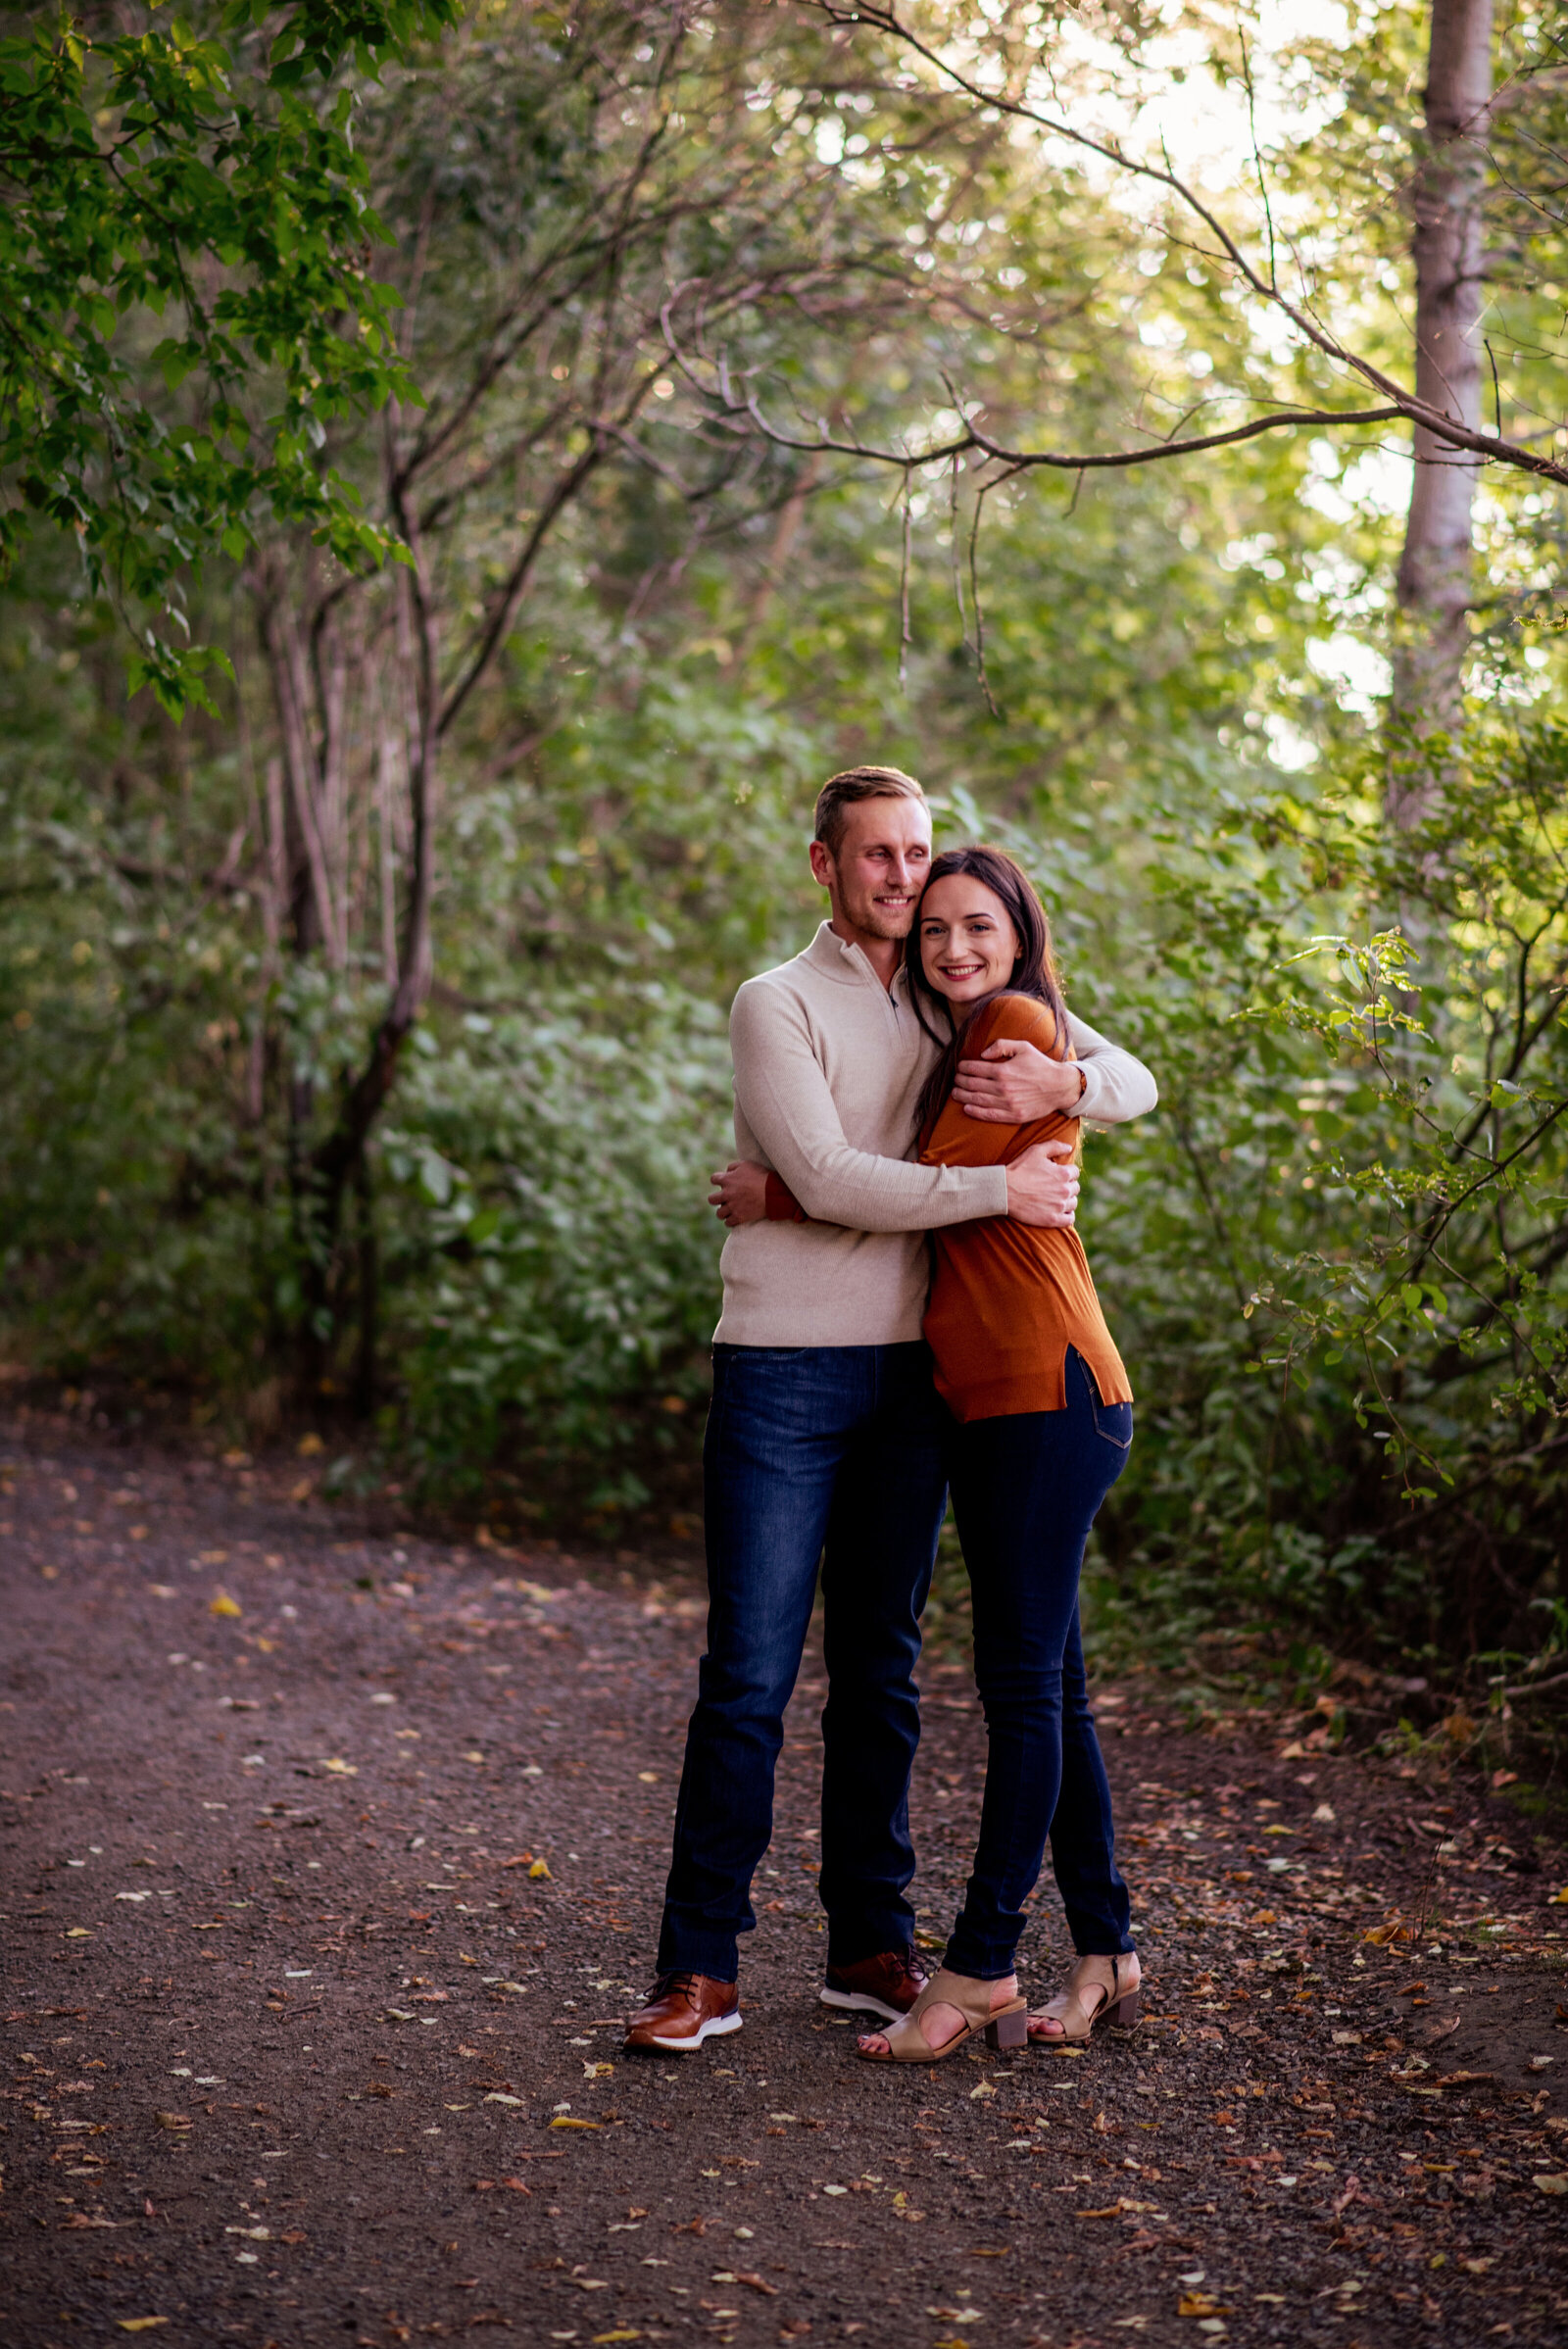 summer engagement session in nature trail